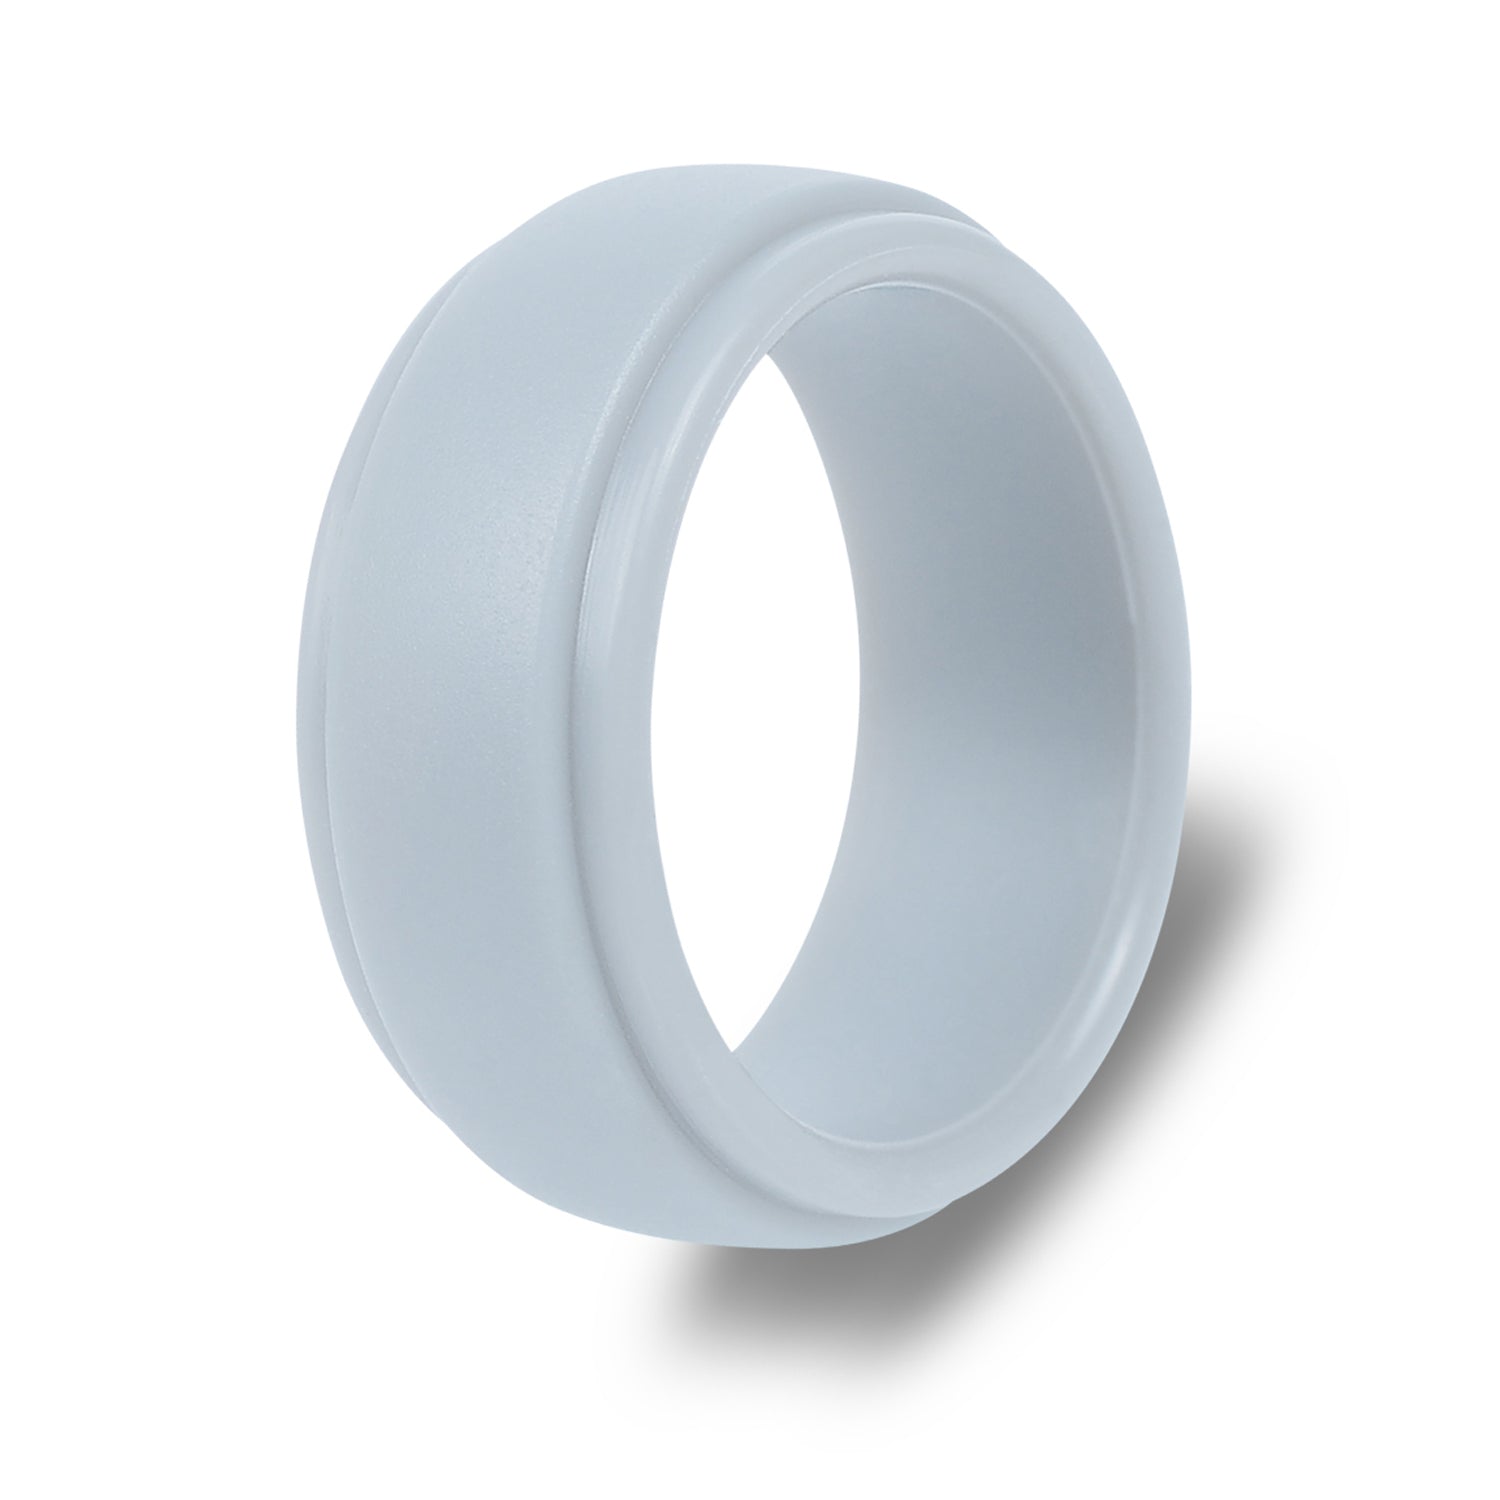 The Mercury - Silicone Ring